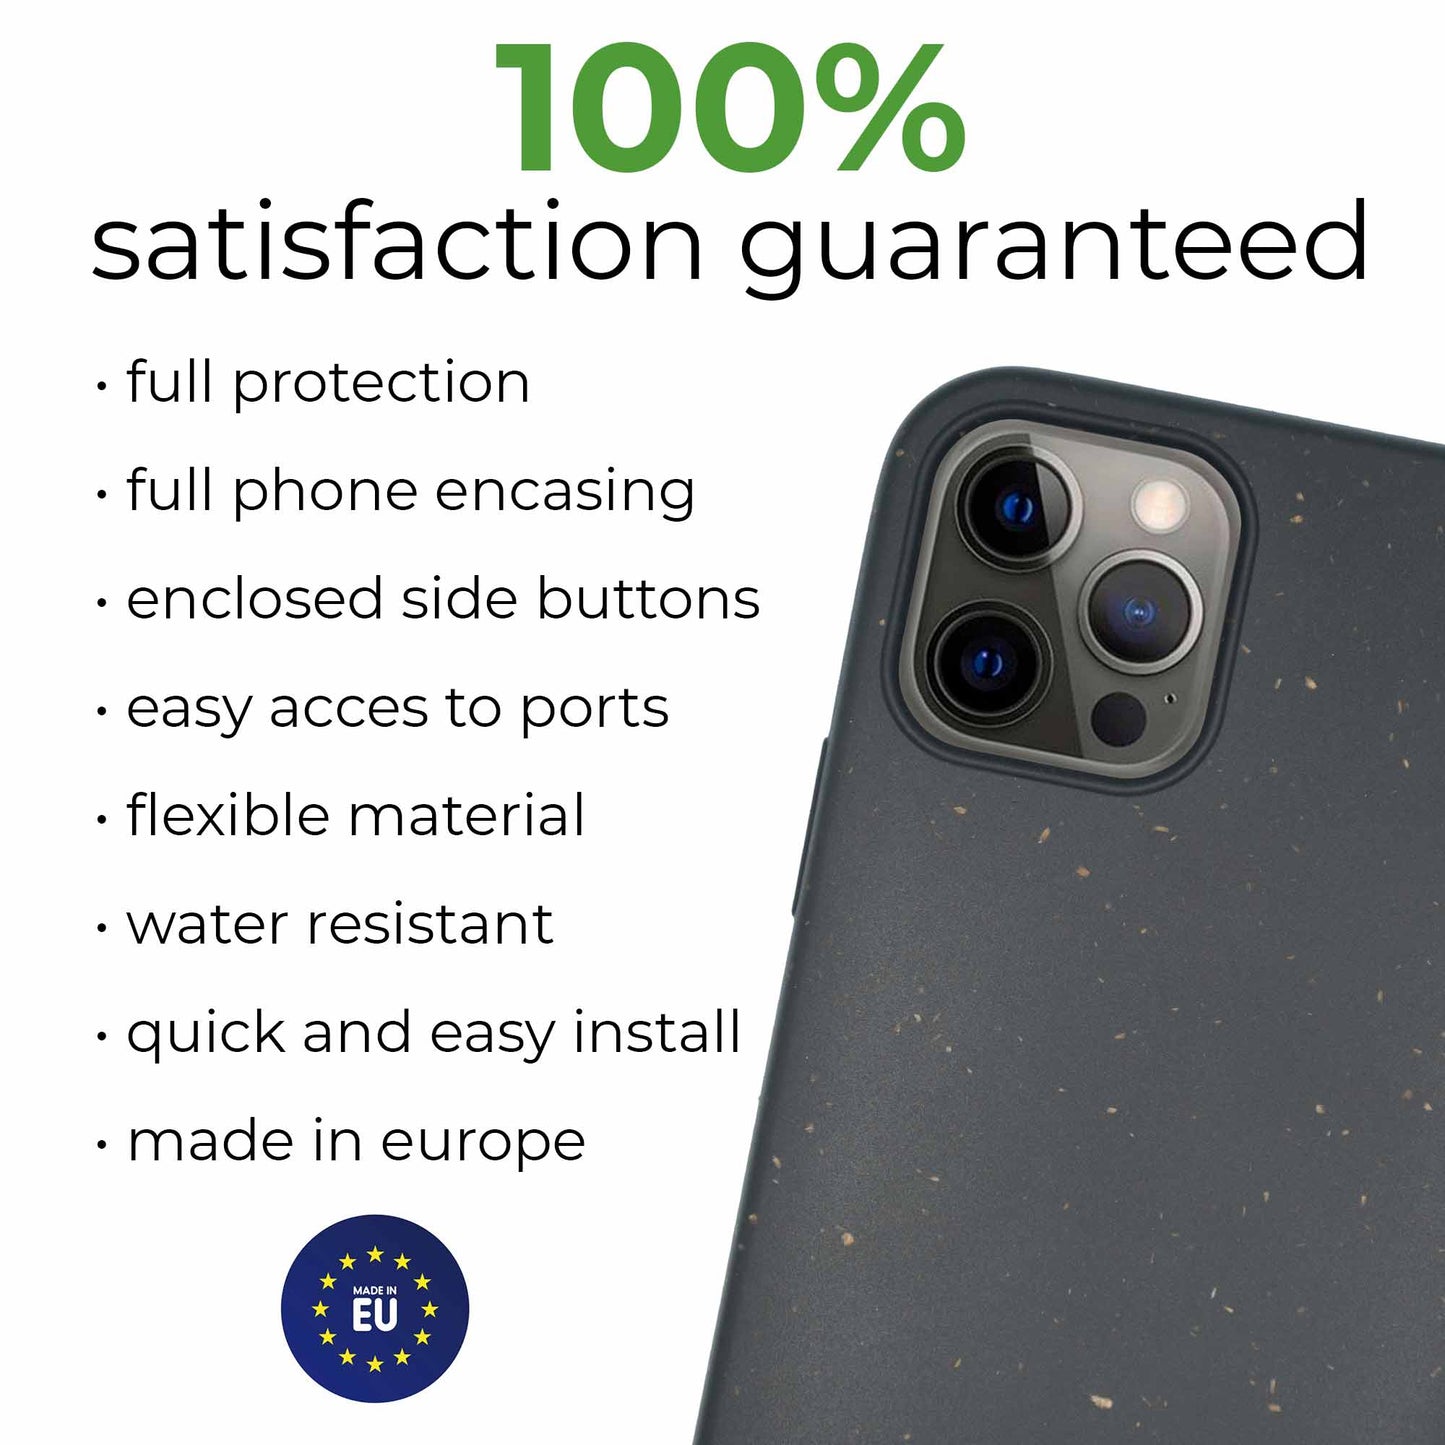 Smartphone with a Tan Lily Biodegradable Personalized iPhone Case - Black featuring gold speckles, displaying camera lenses and side buttons; next to text highlighting case features and EU satisfaction guarantee.